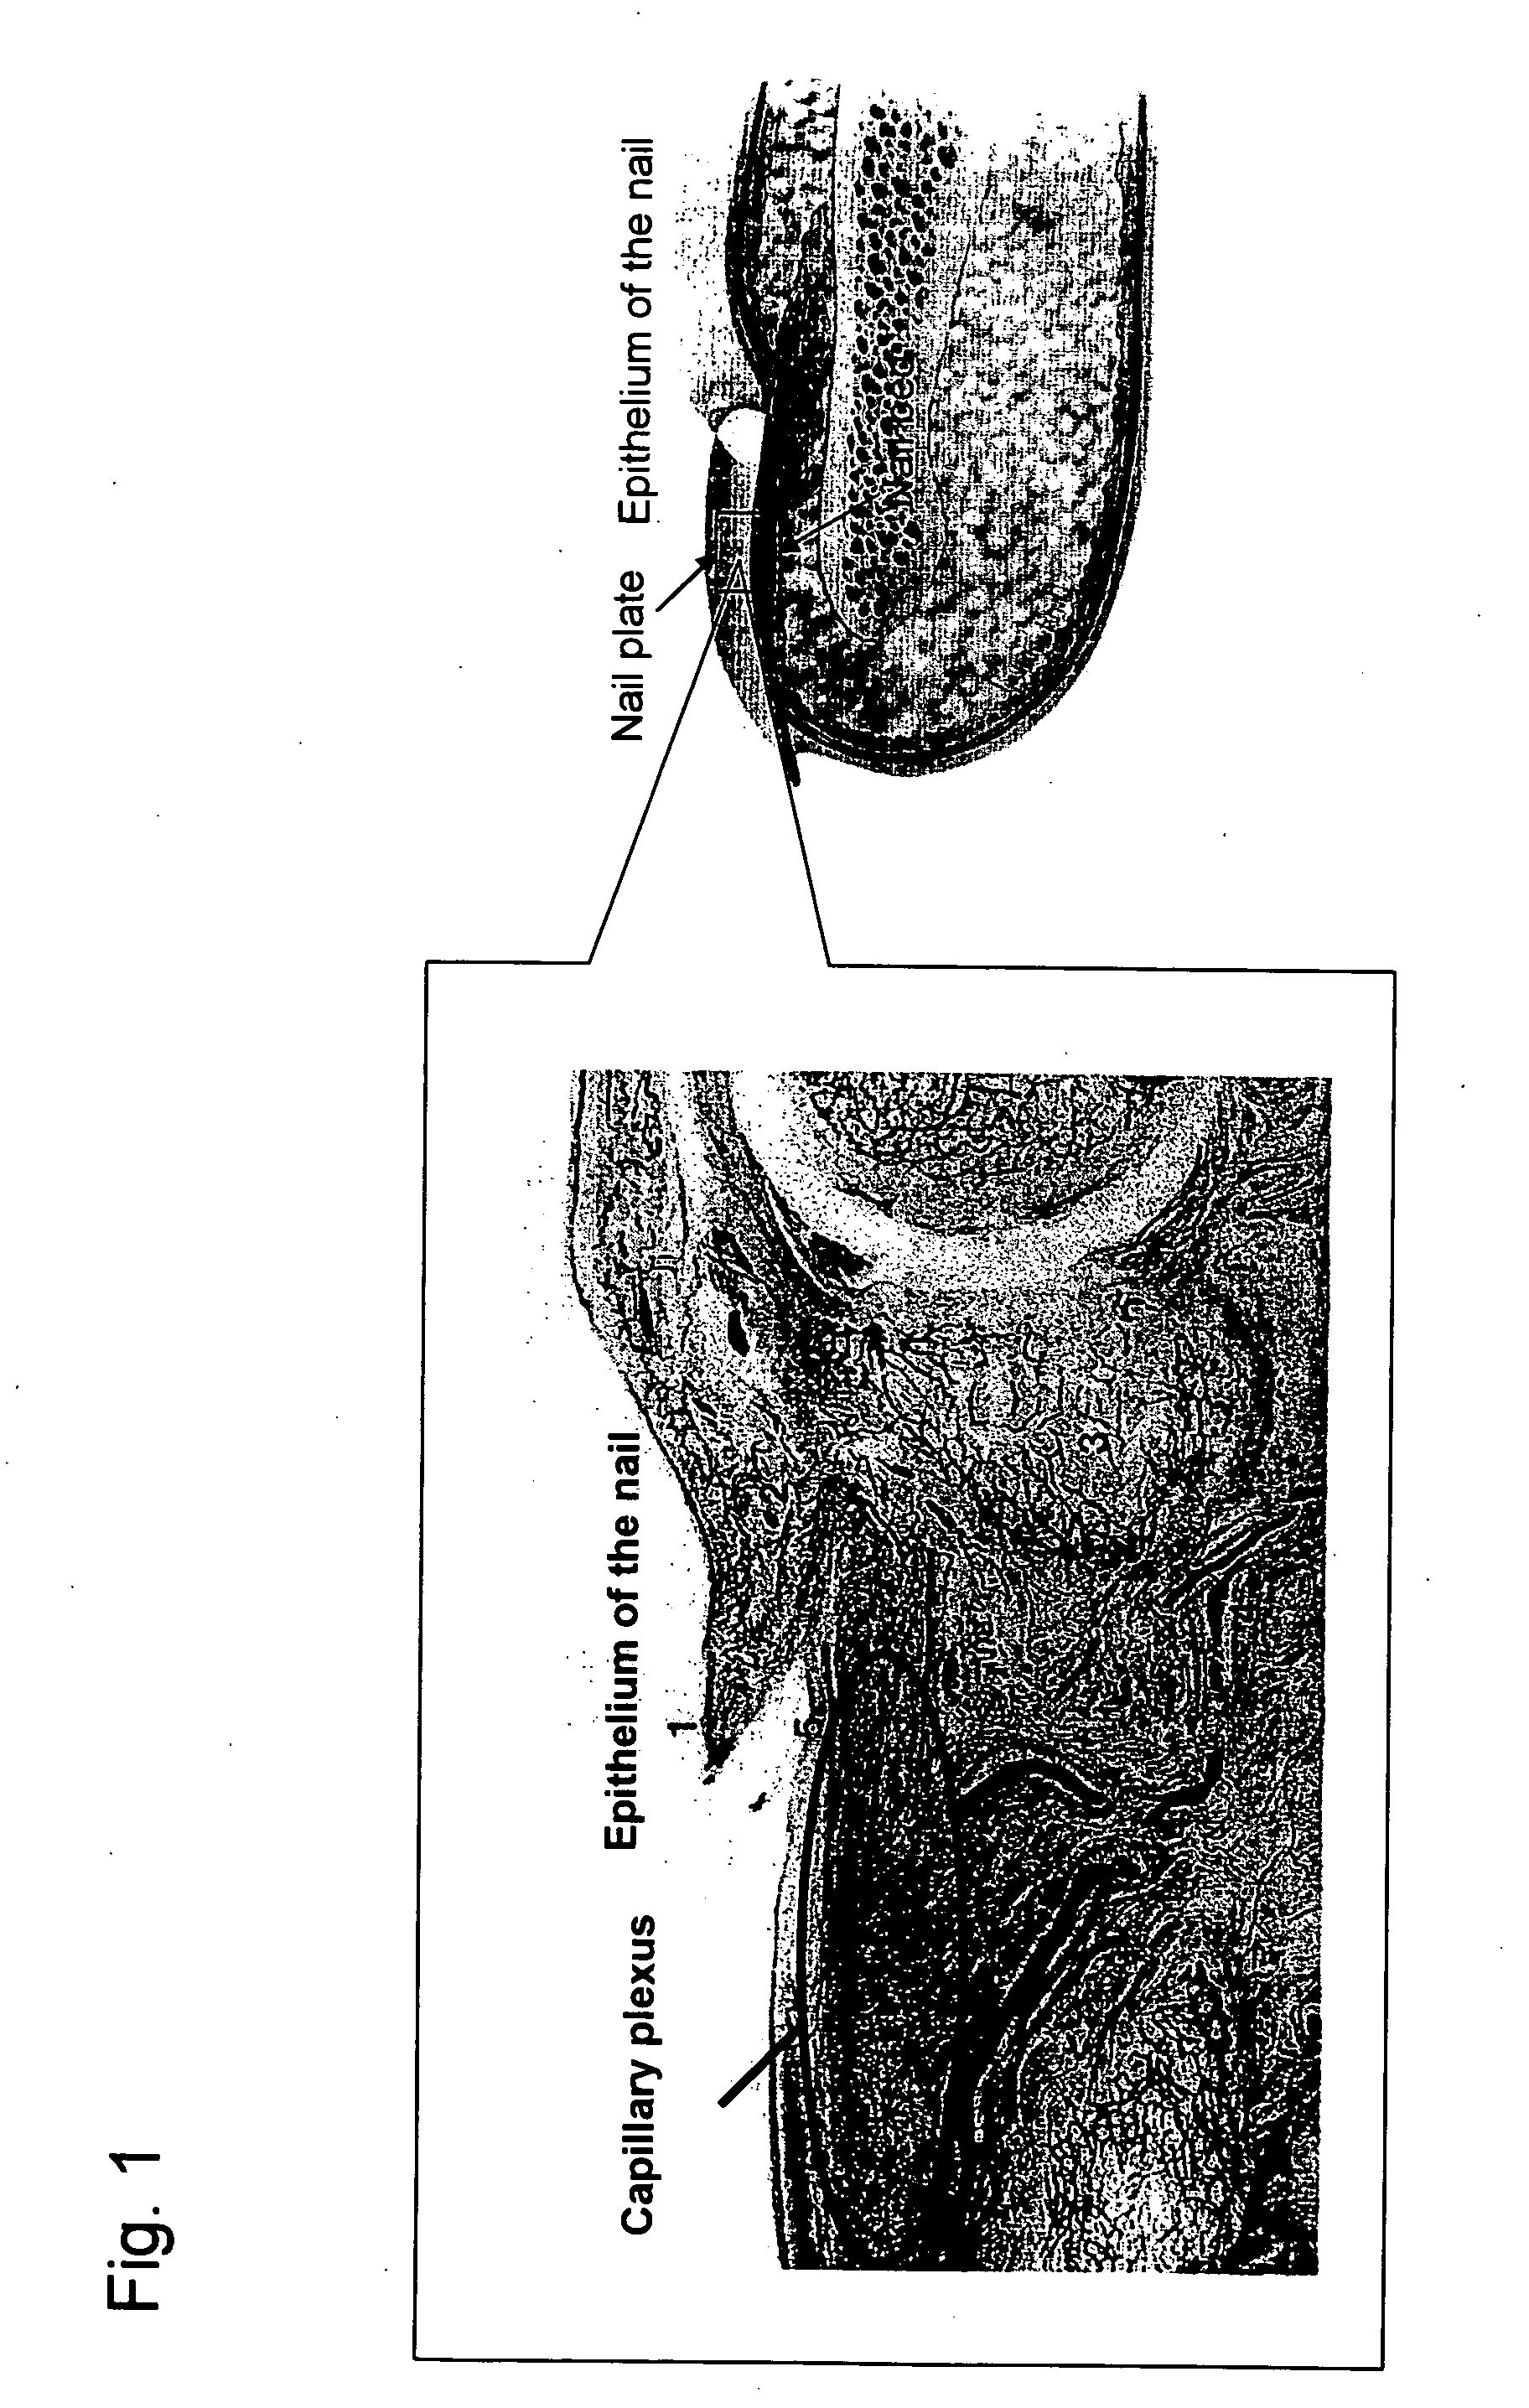 Noninvasive measuring device for substance in blood via nail and a nail evaporation device